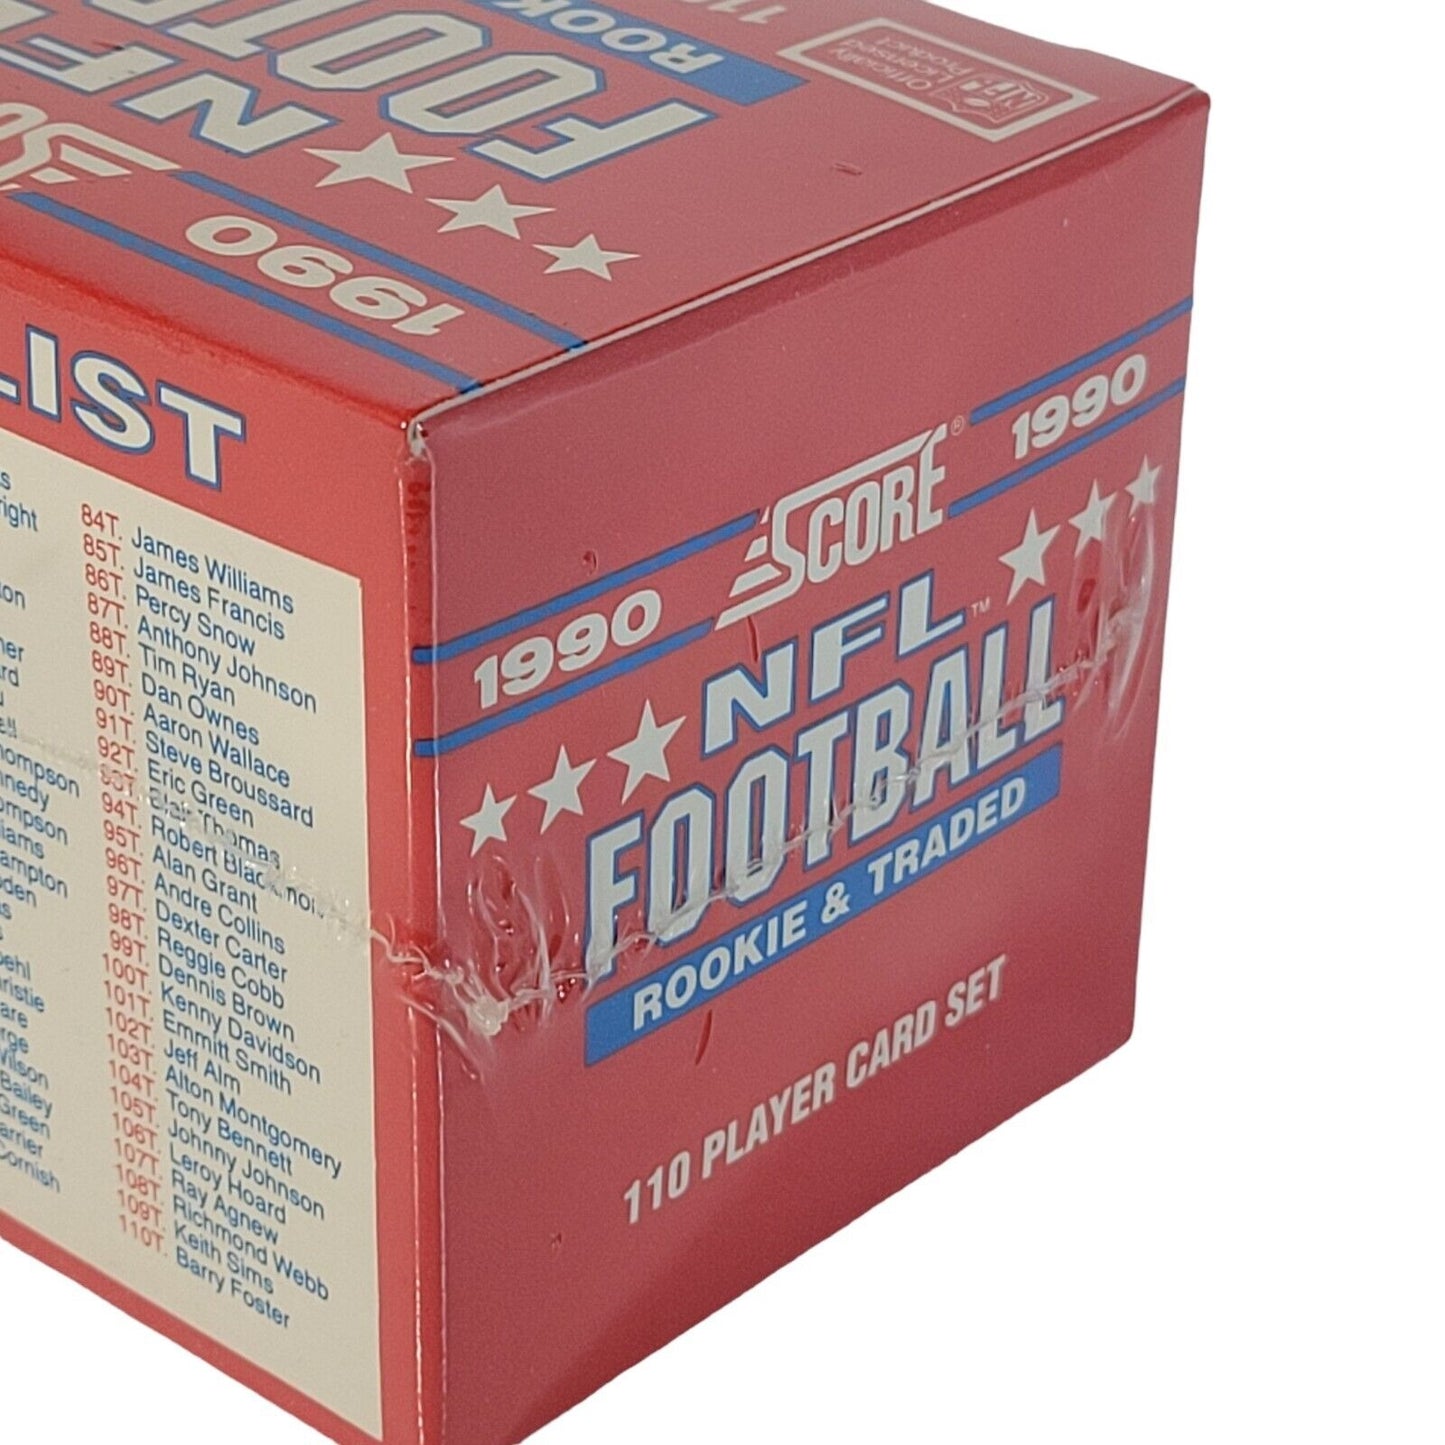 1990 SCORE NFL Football Rookie and Traded FACTORY SEALED 110 Player Card SET